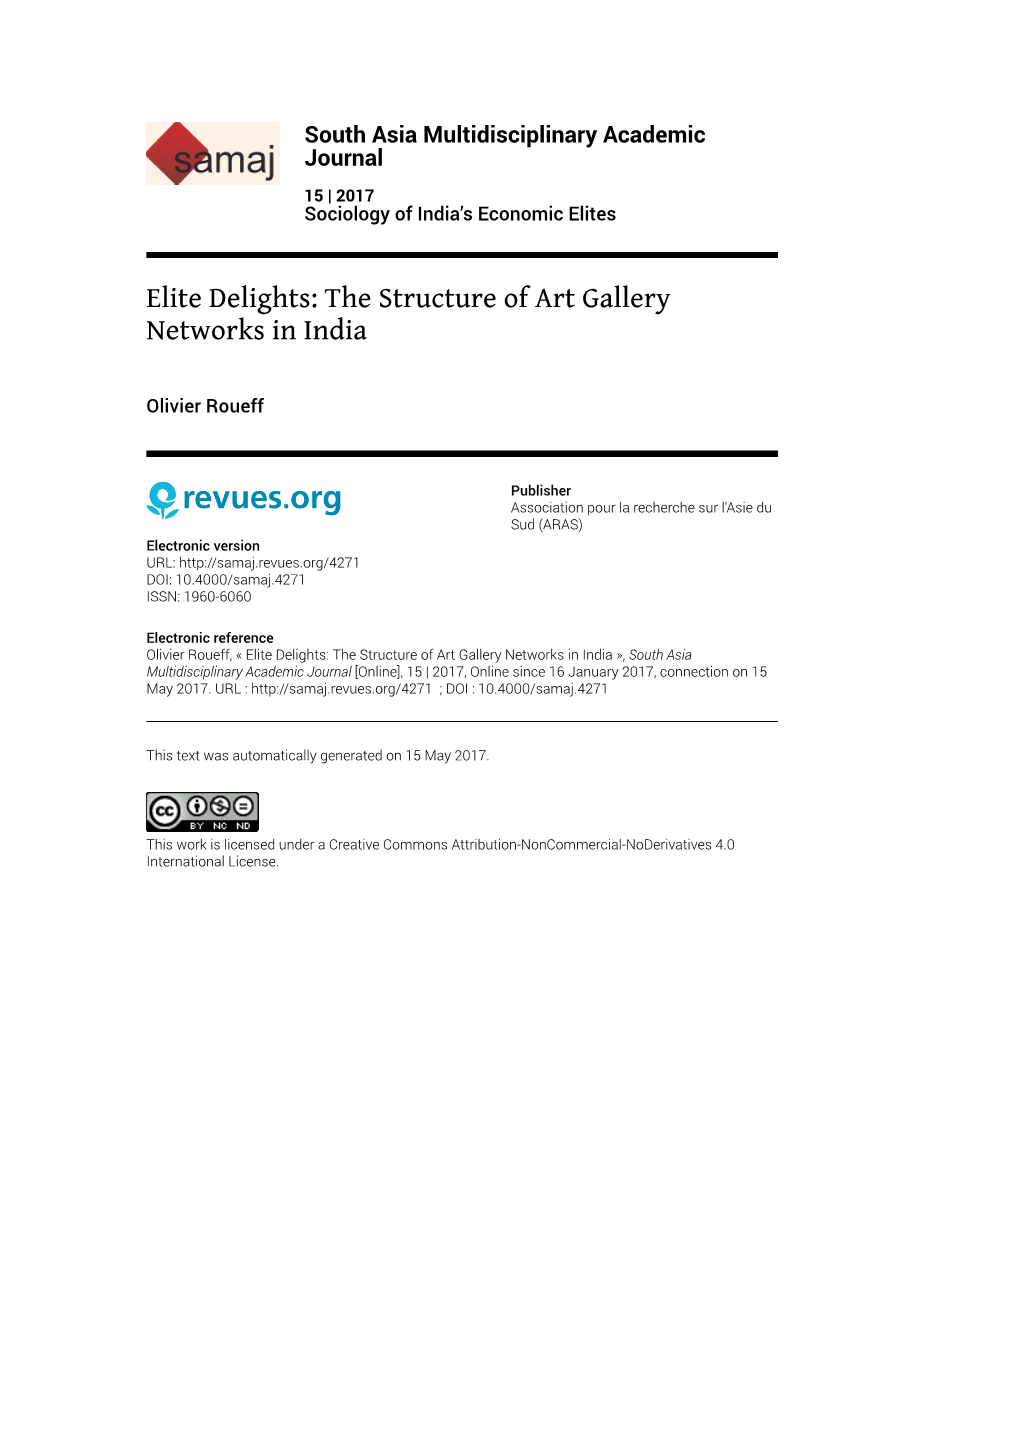 Elite Delights: the Structure of Art Gallery Networks in India